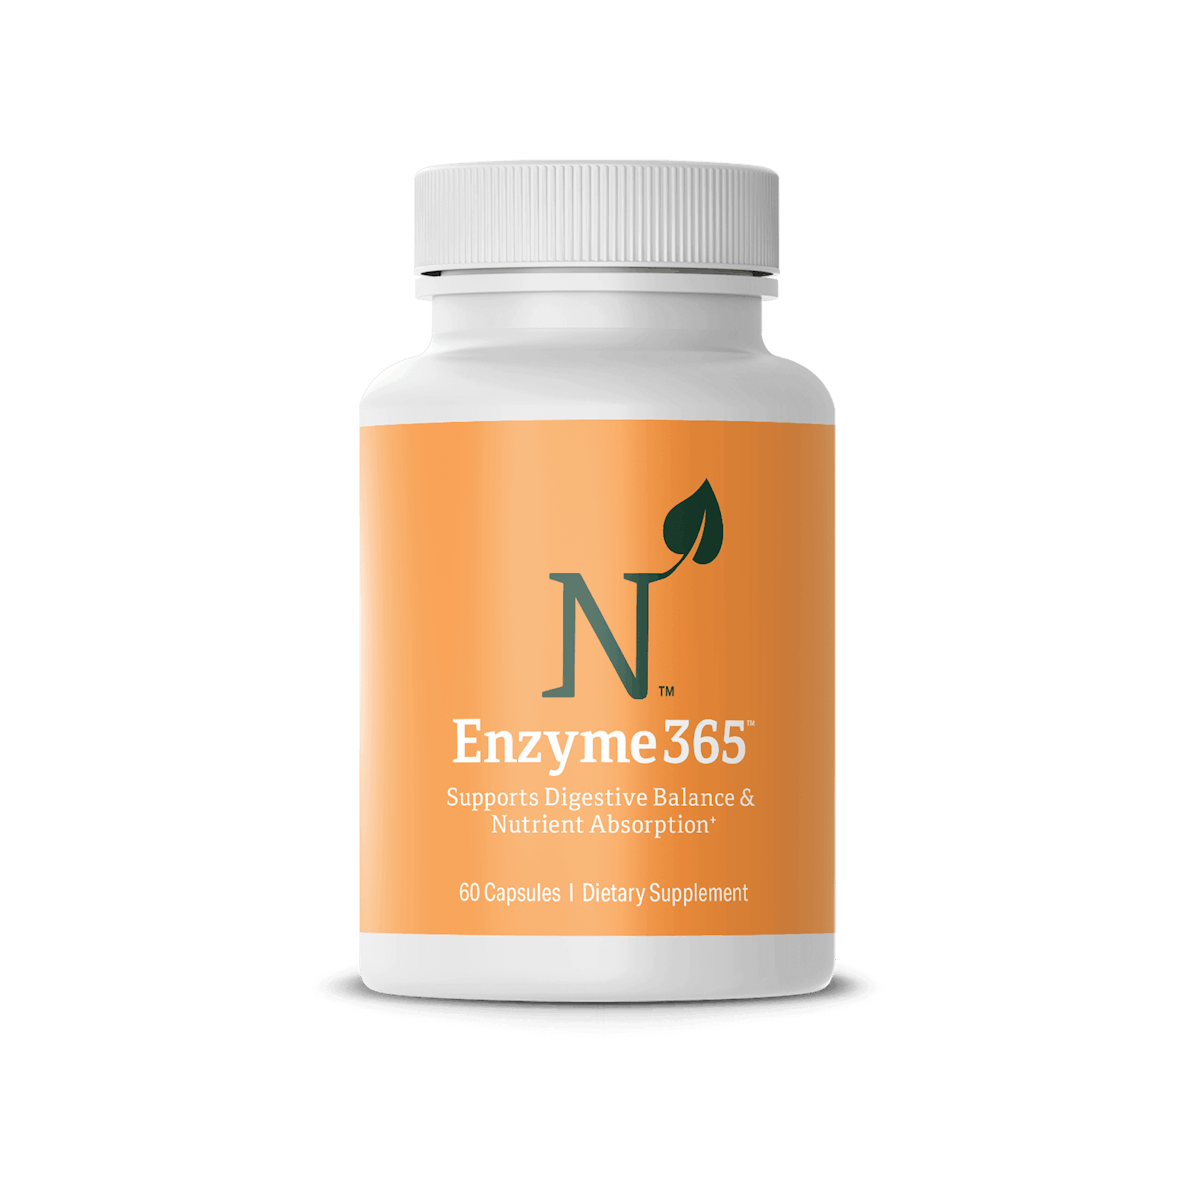 Enzyme 365